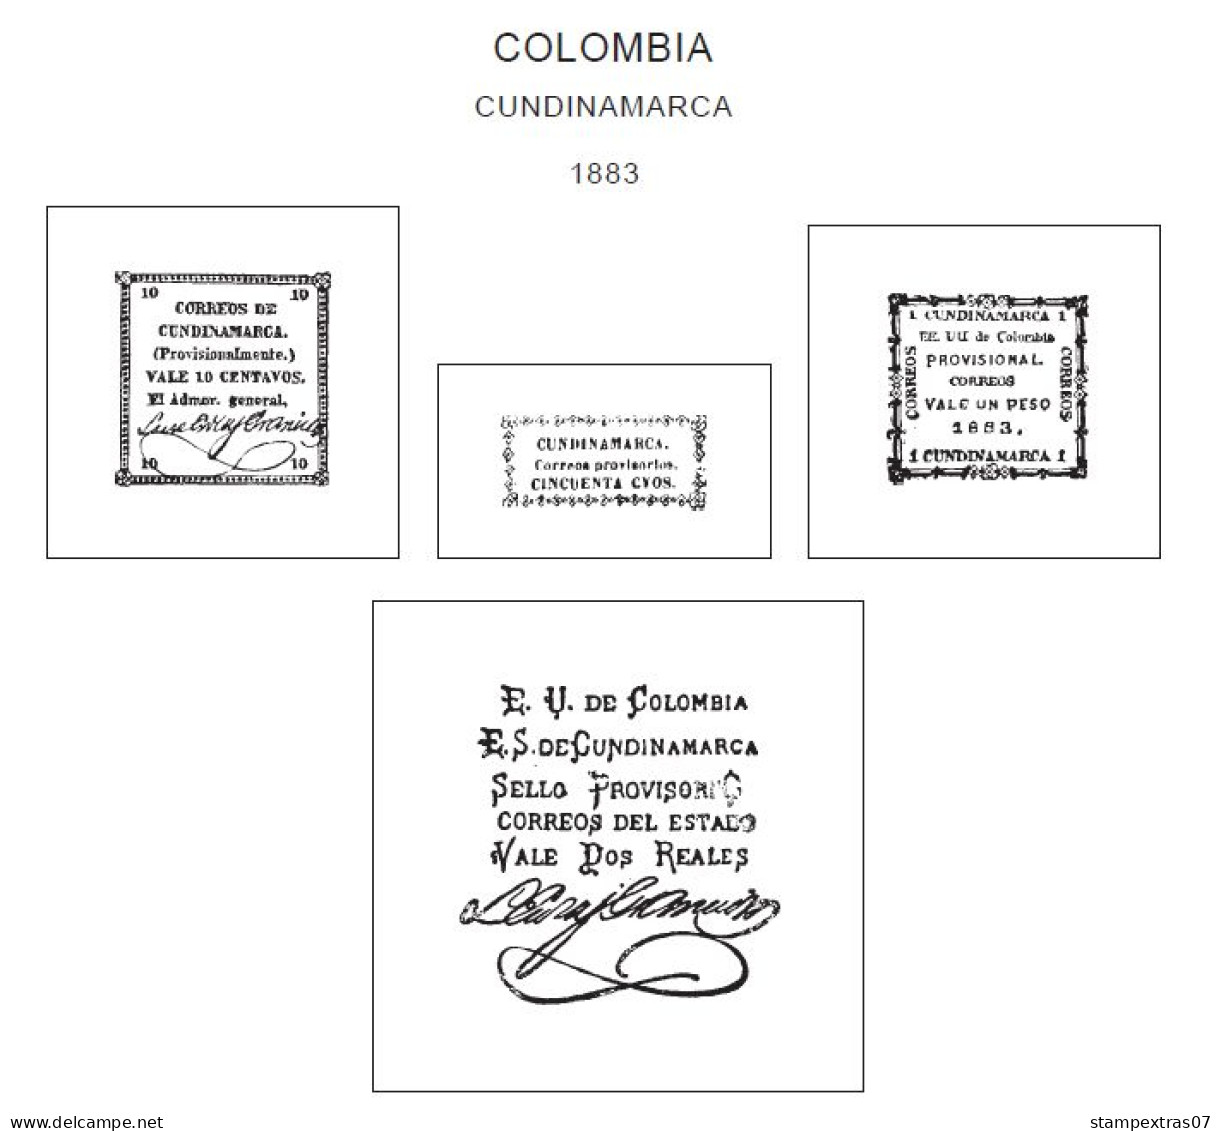 COLOMBIA STAMP ALBUM PAGES 1859-2011 (353 Pages) - Anglais